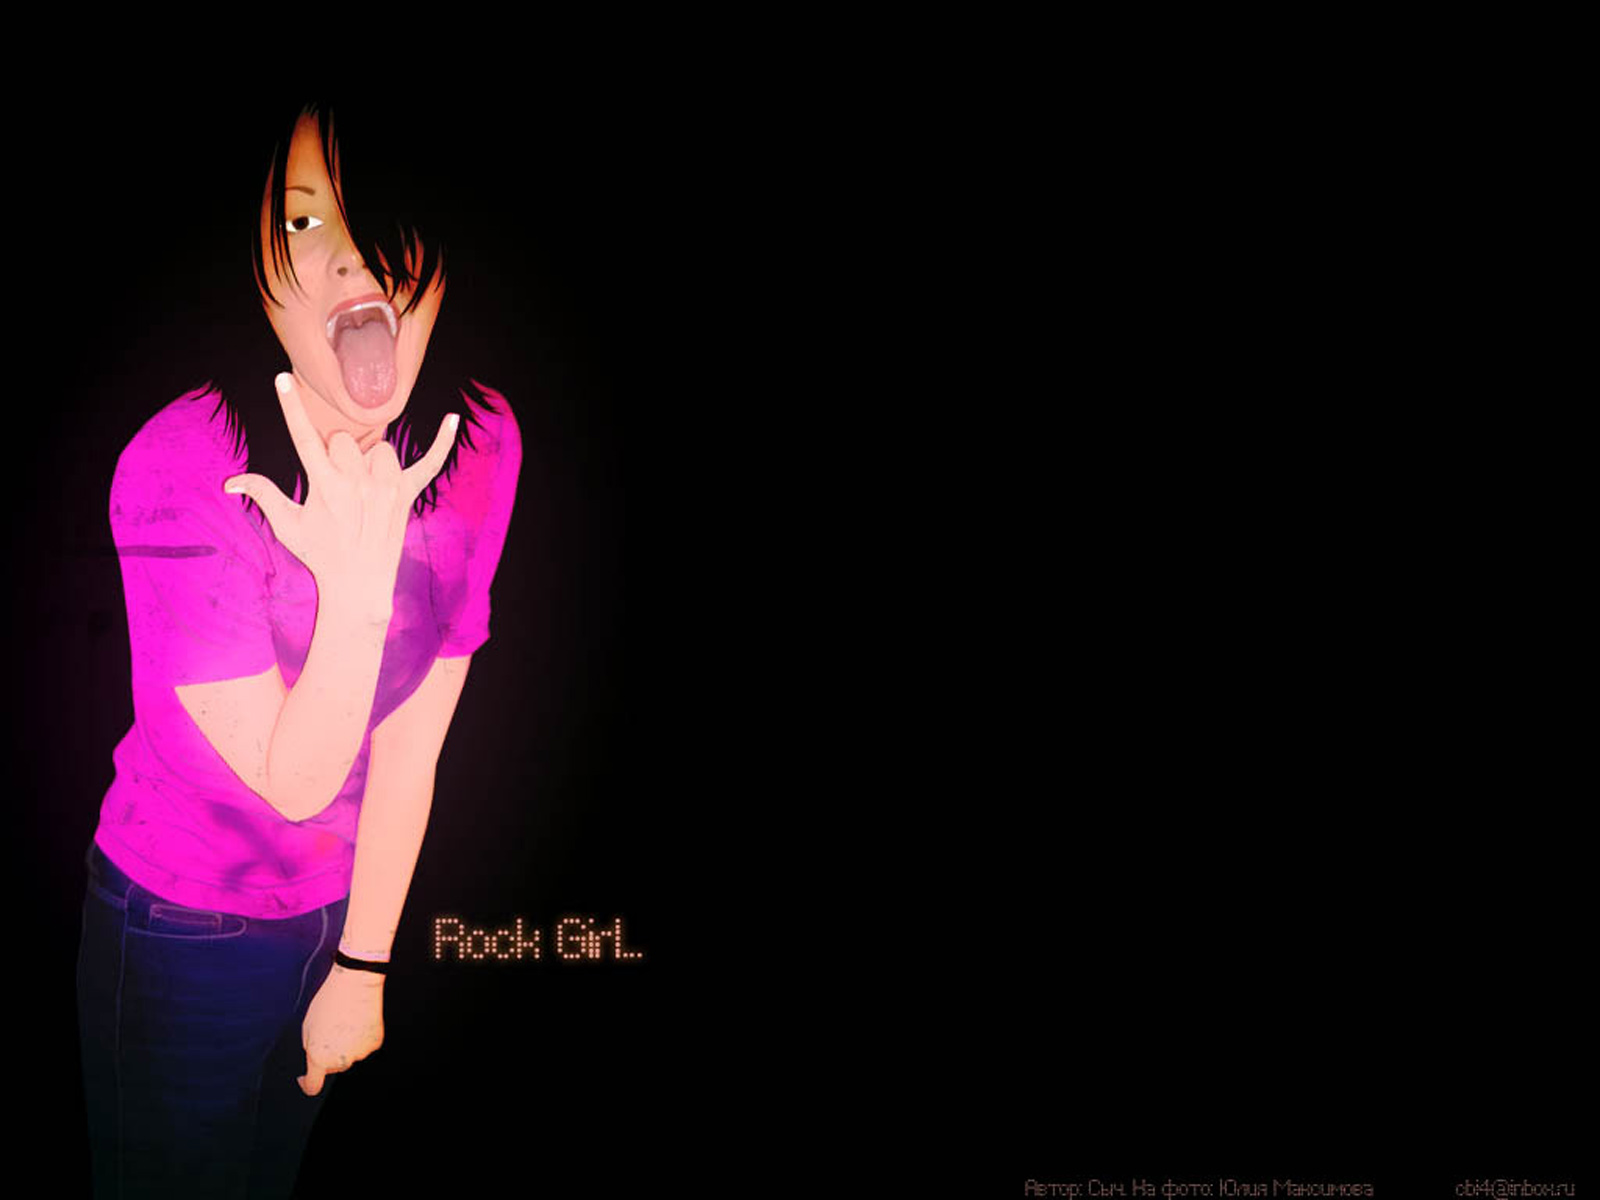 Emo Rock Girl Wallpaper And Image Pictures Photos